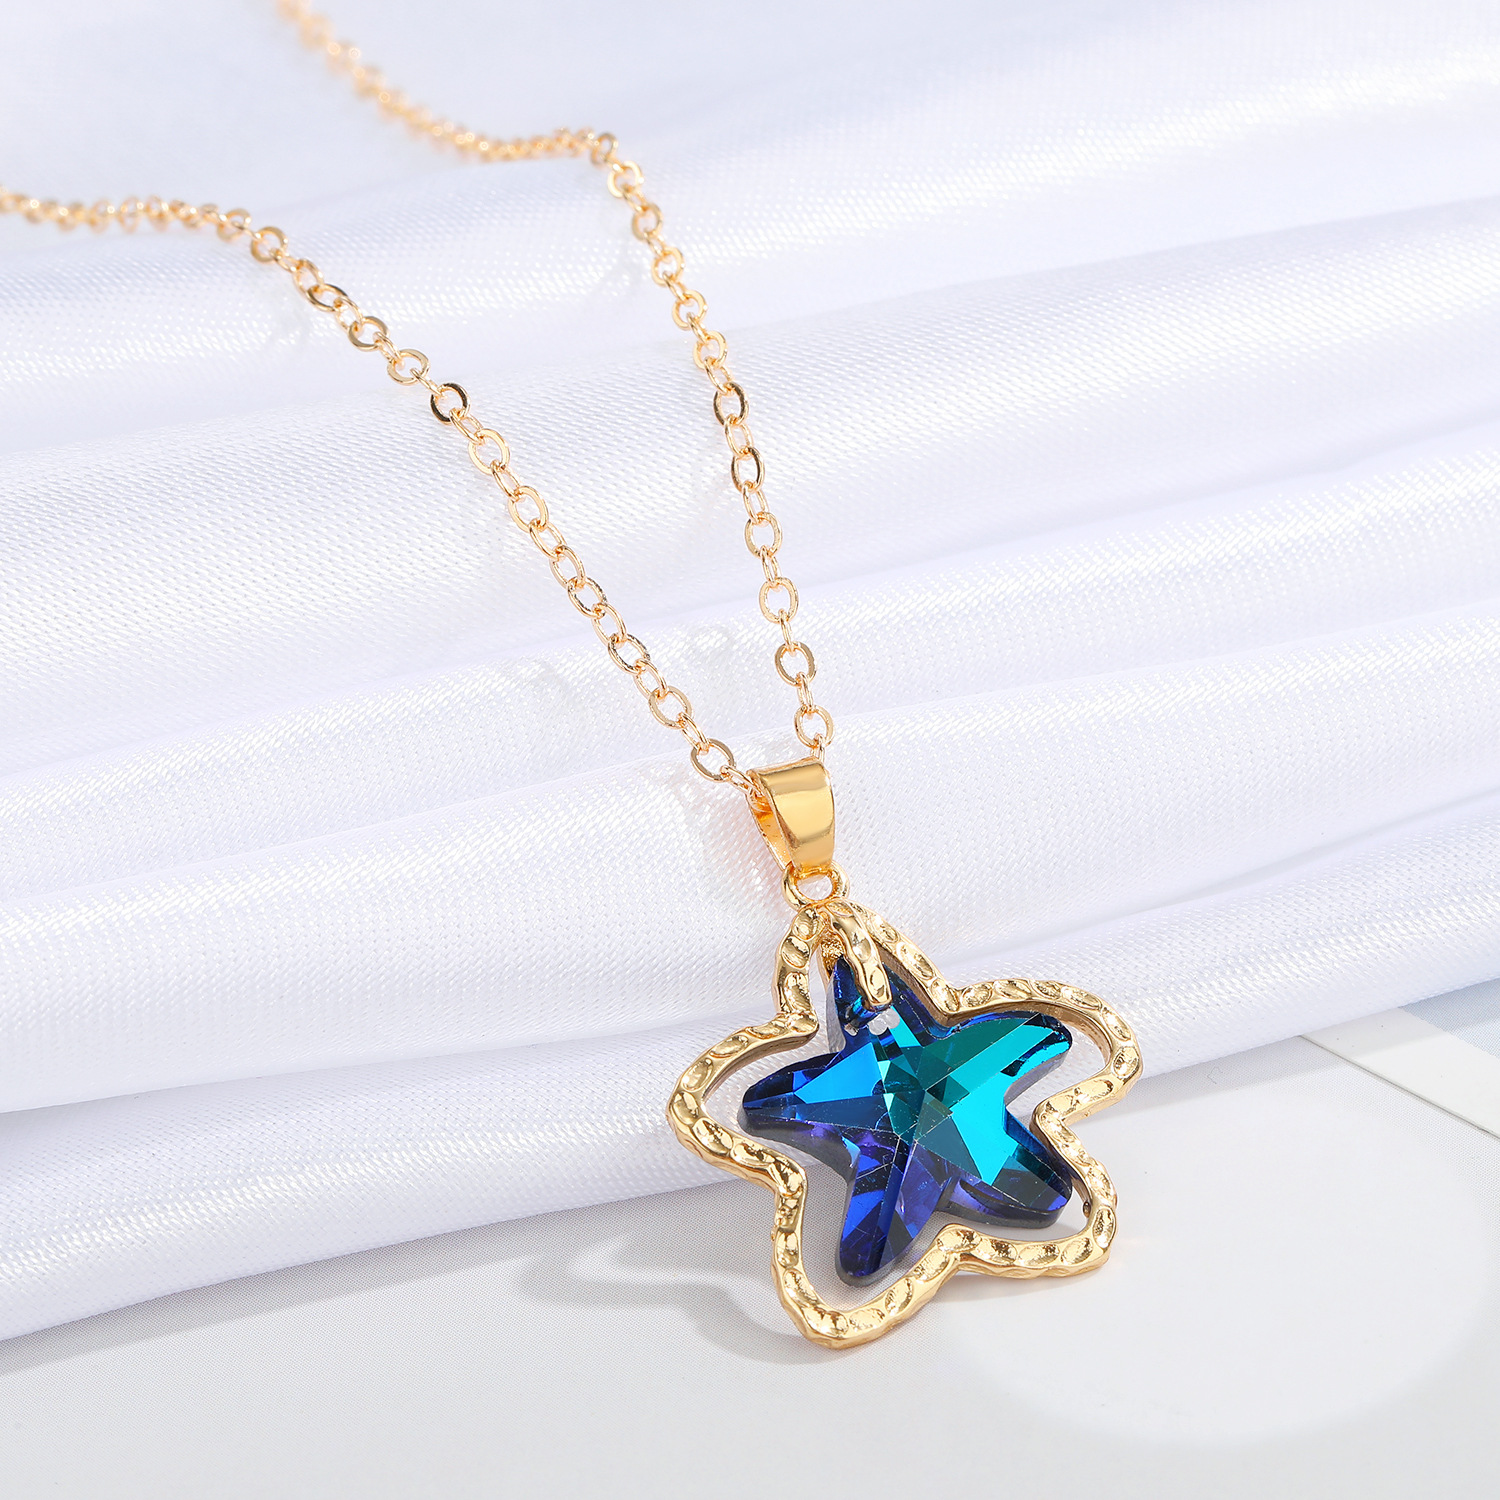 European CrossBorder Sold Jewelry Blue Crystal Glass Necklace Simple Star and Moon Pendant Clavicle Chain Female Necklacepicture3